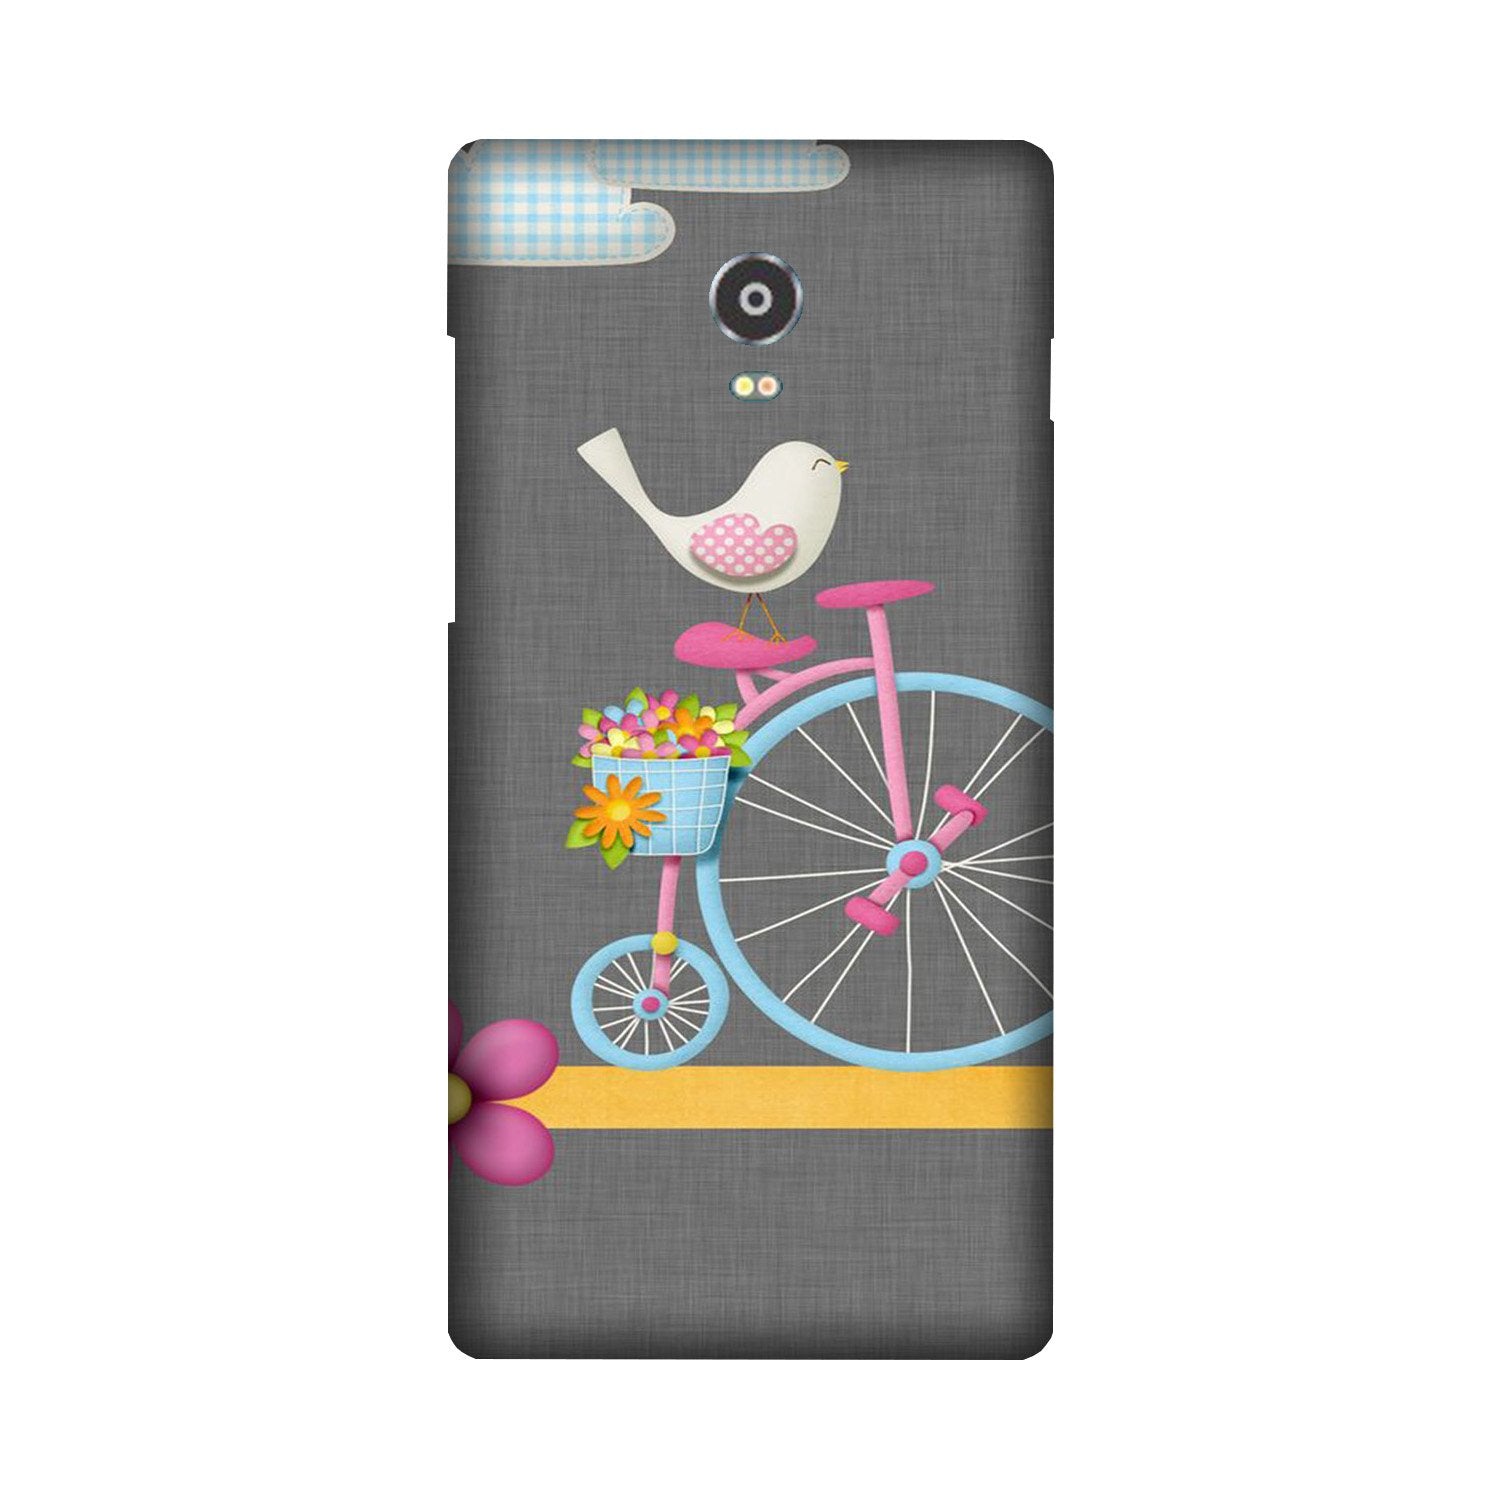 Sparron with cycle Case for Lenovo Vibe P1